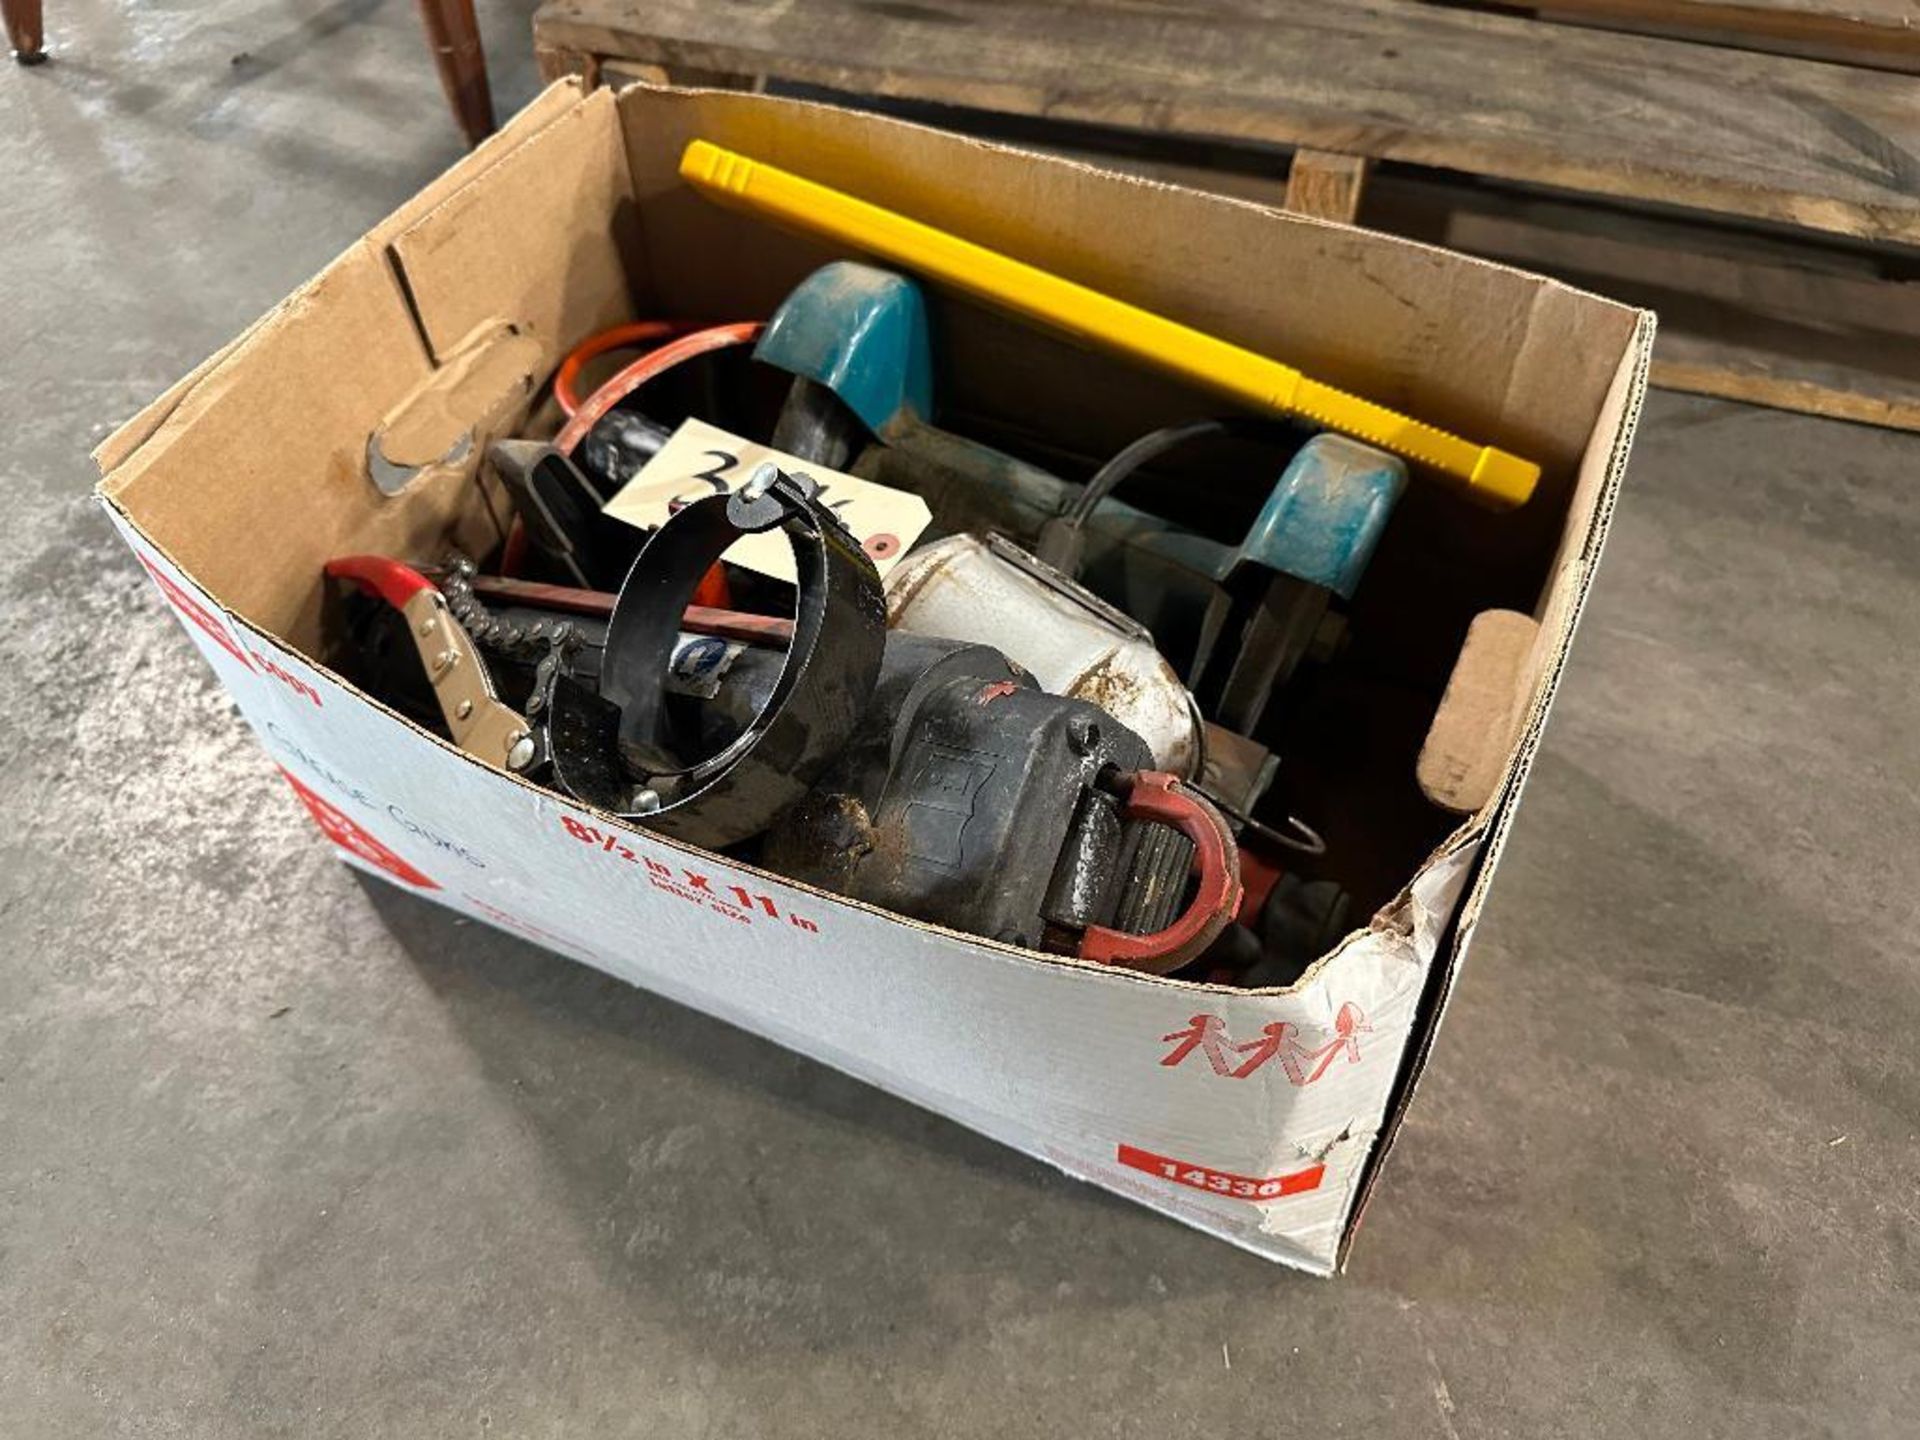 Box of Asst. Filter Wrenches, (2) HILTI MD2500, Bench Grinder, etc. - Image 2 of 4